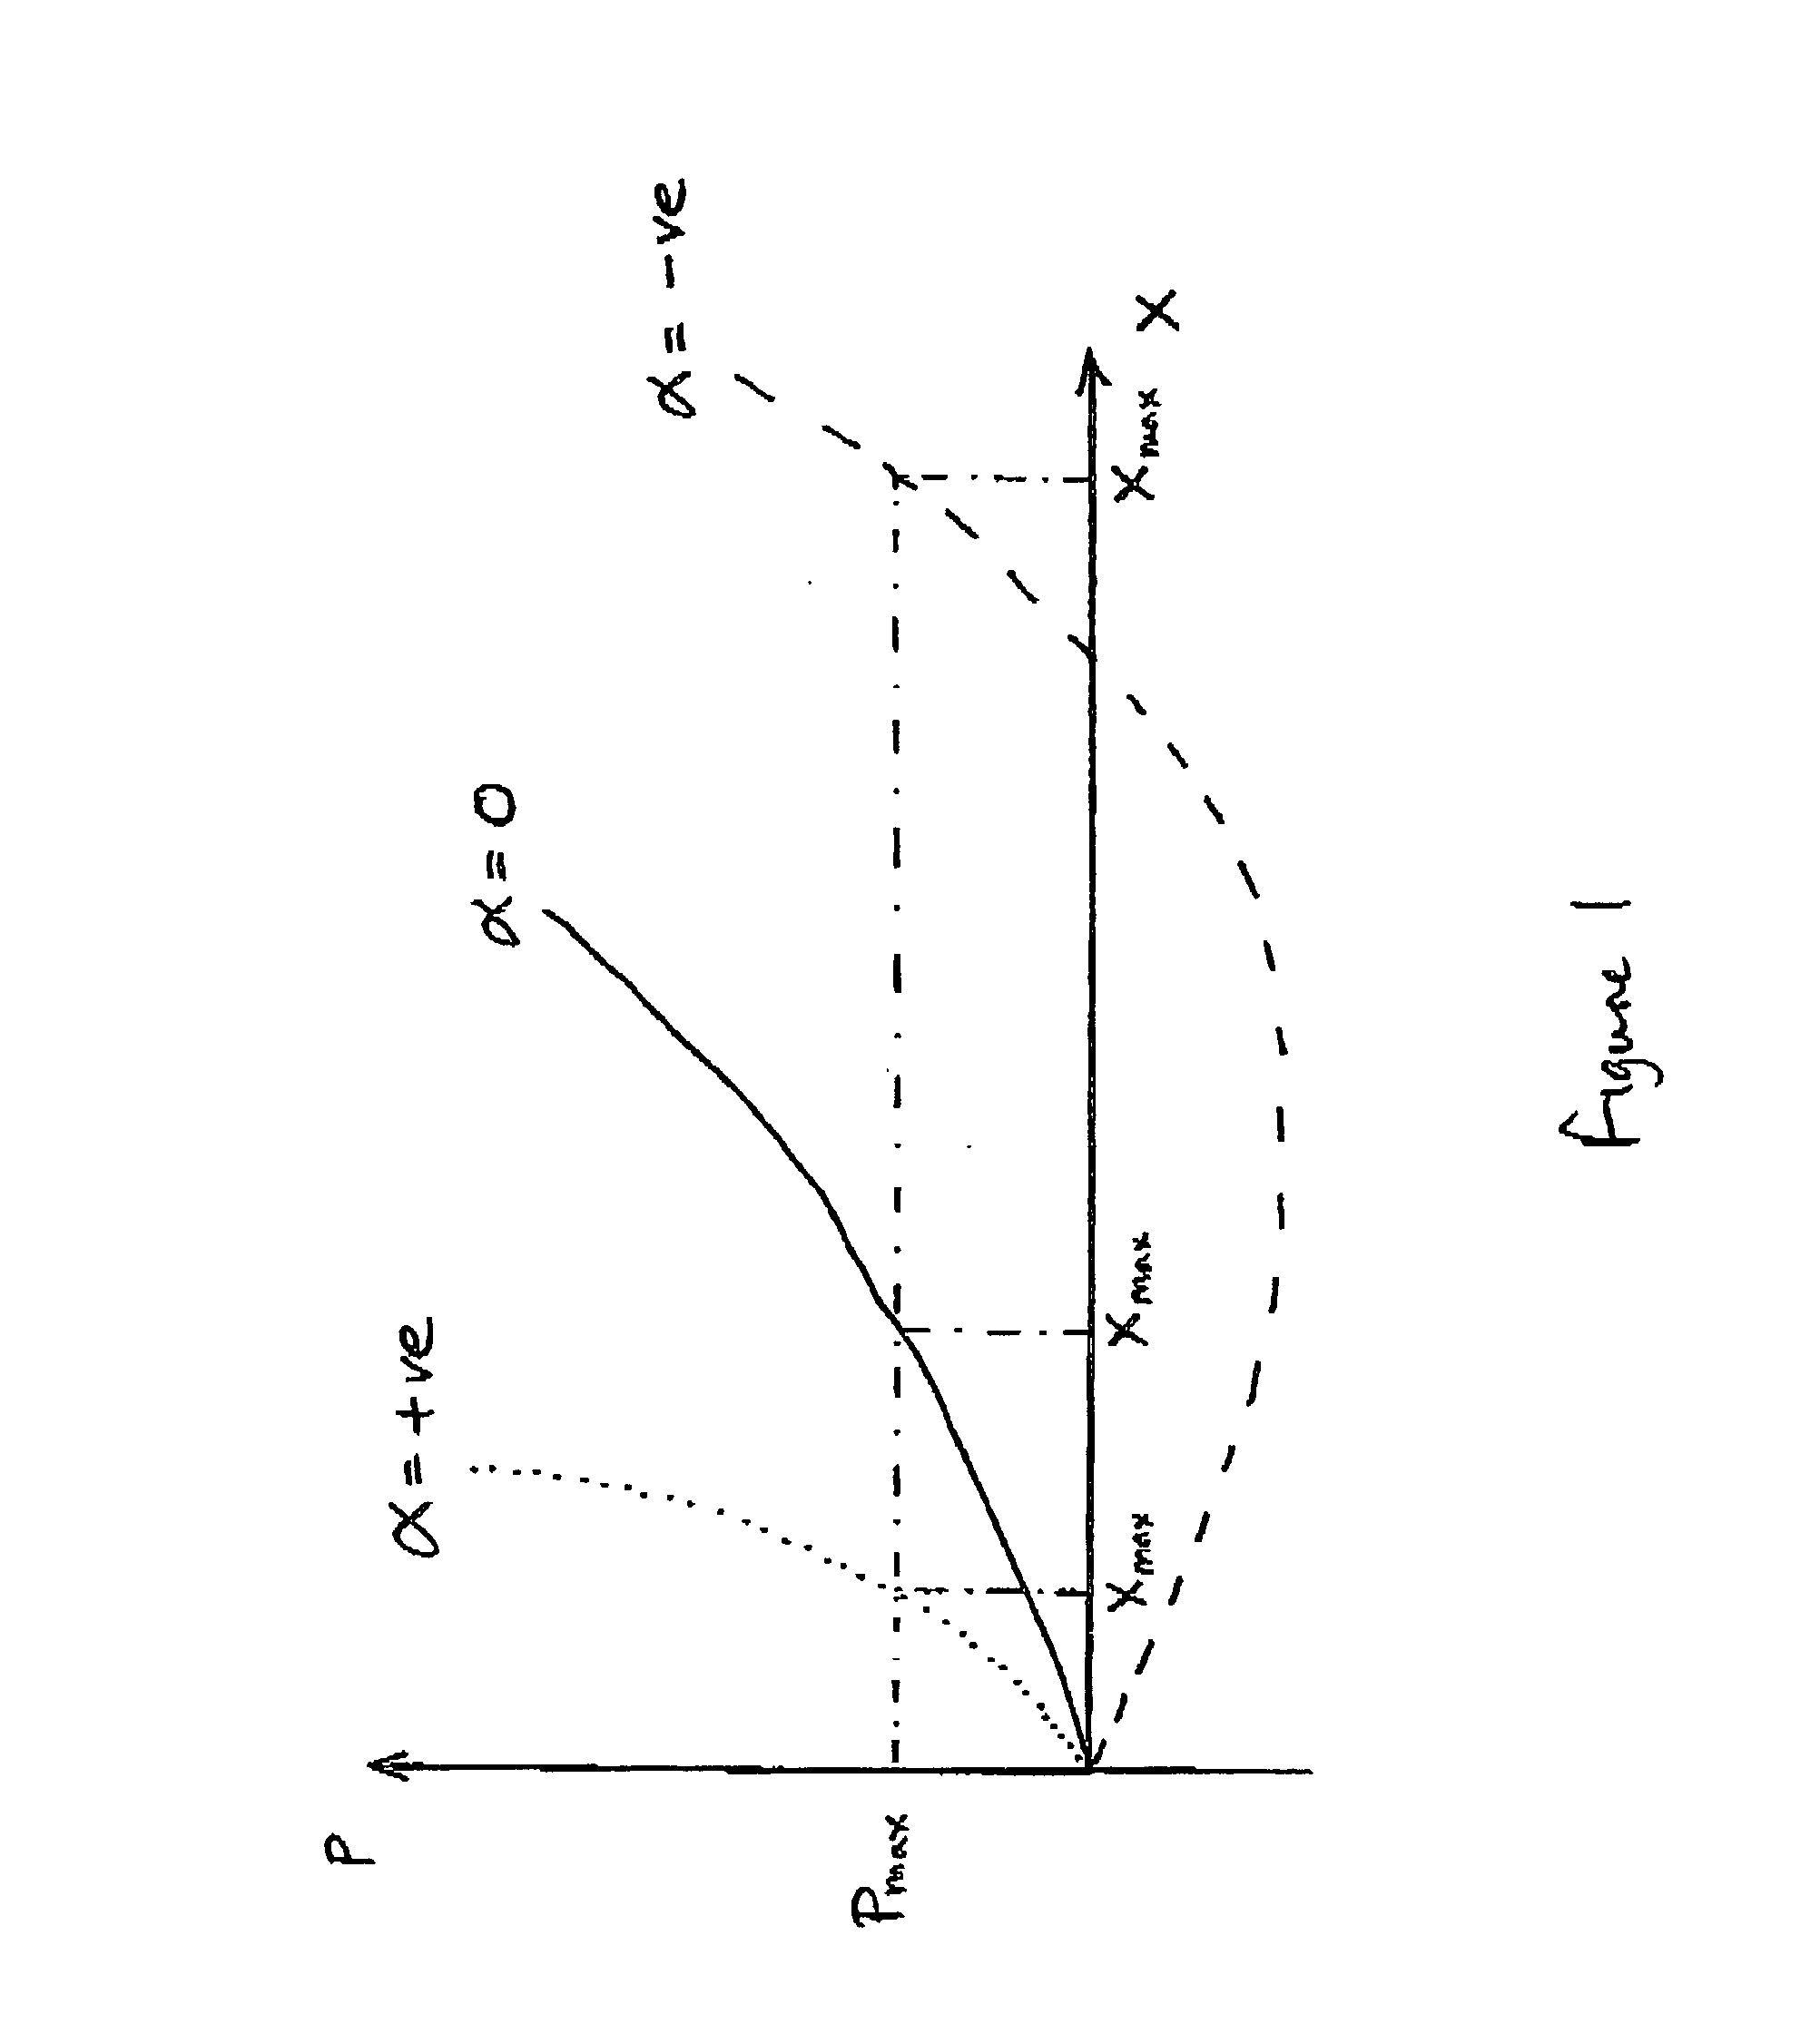 Optical transmission systems